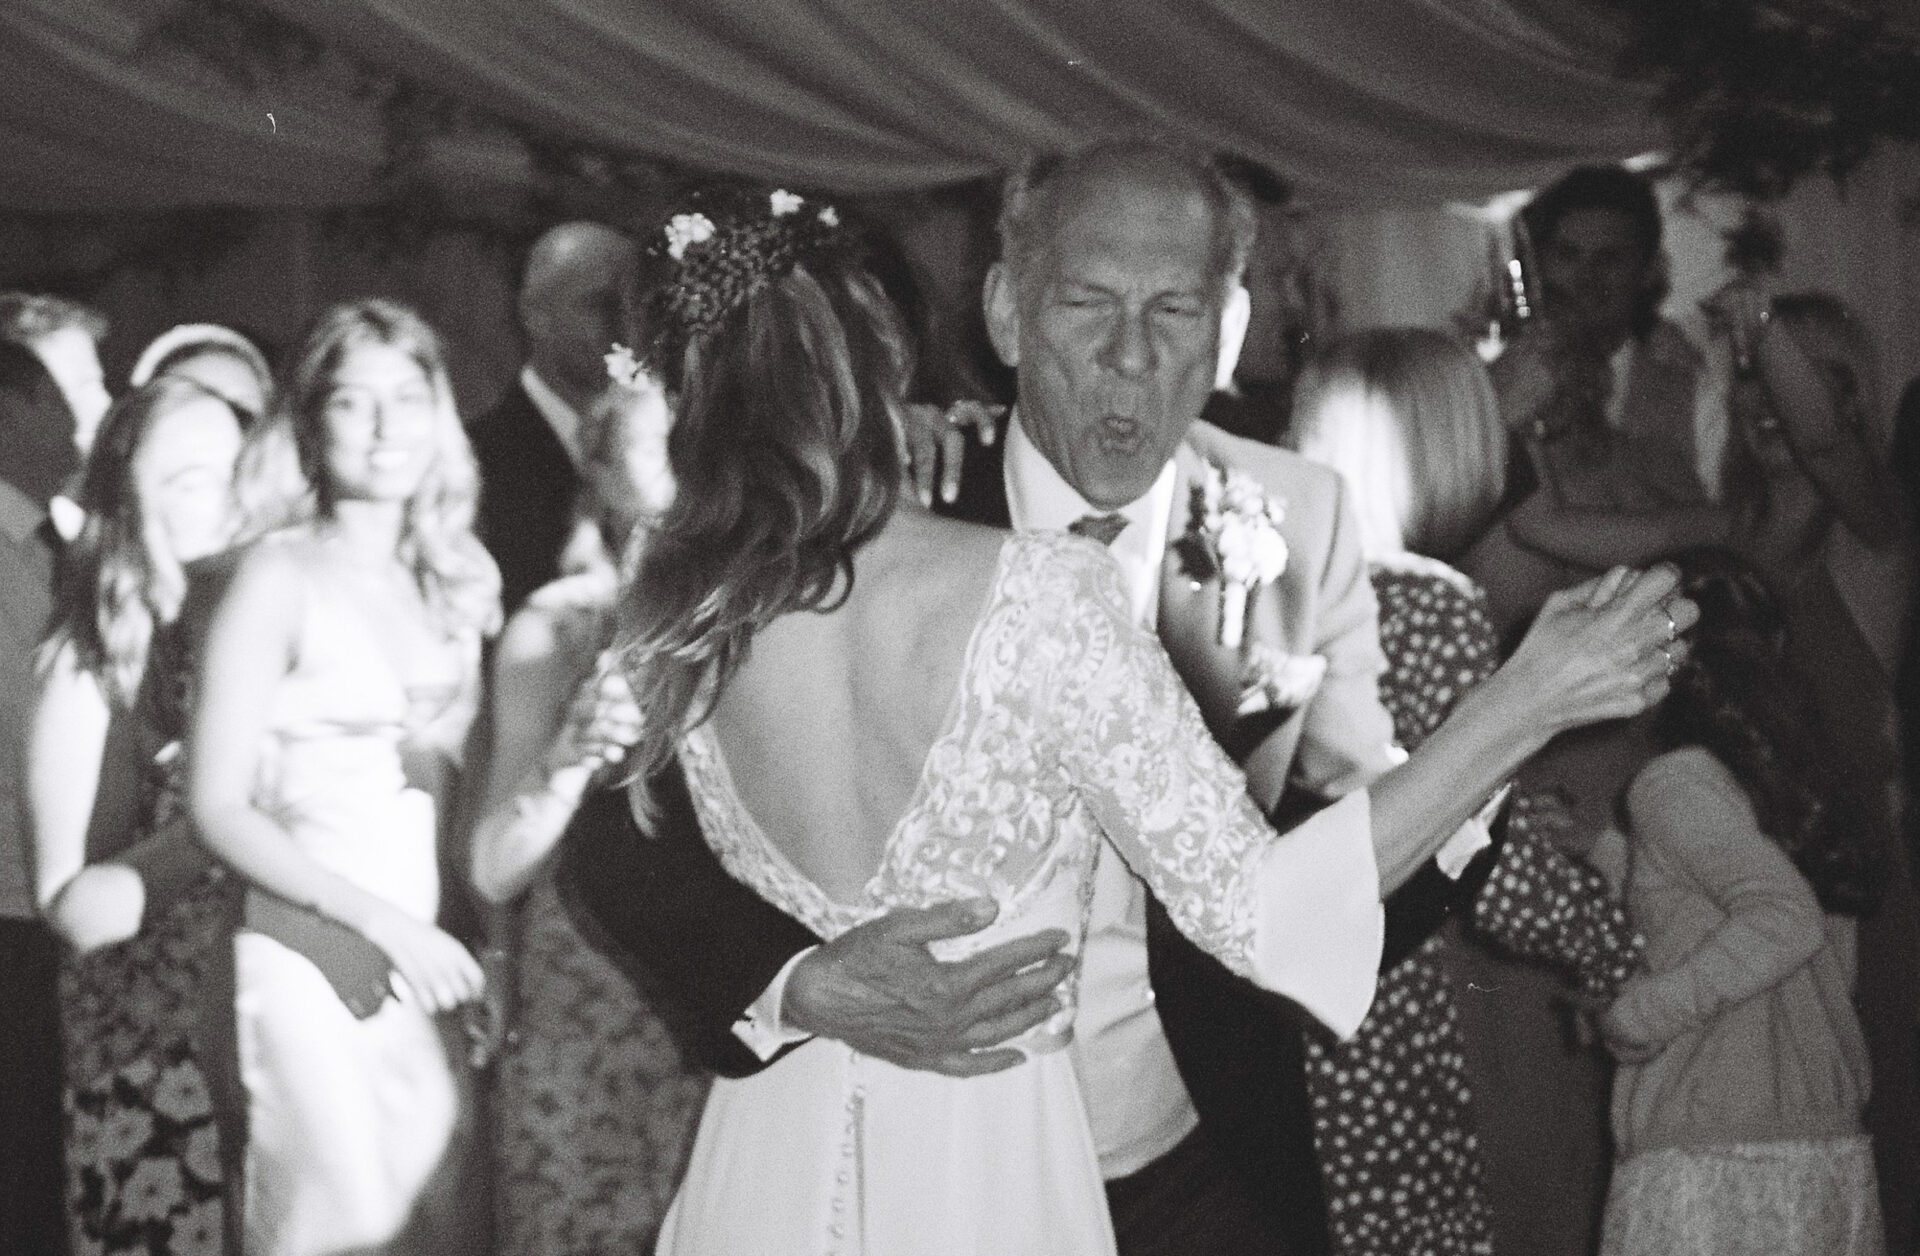 The bride and her father dance, photographed on 35mm